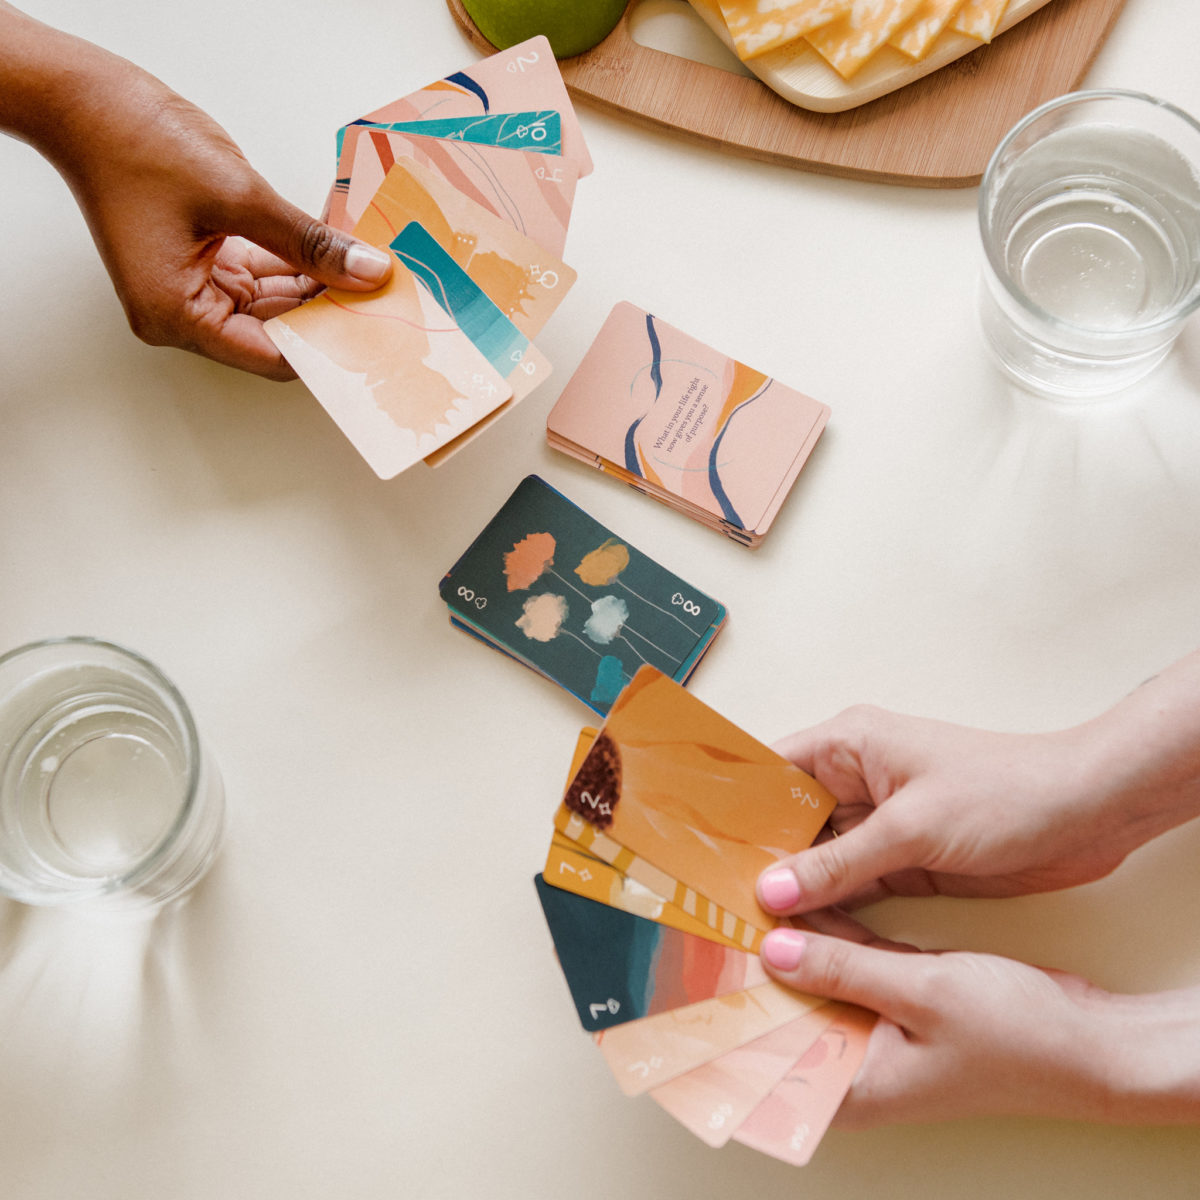 A close up of two hands holding playing cards at a table with food on it